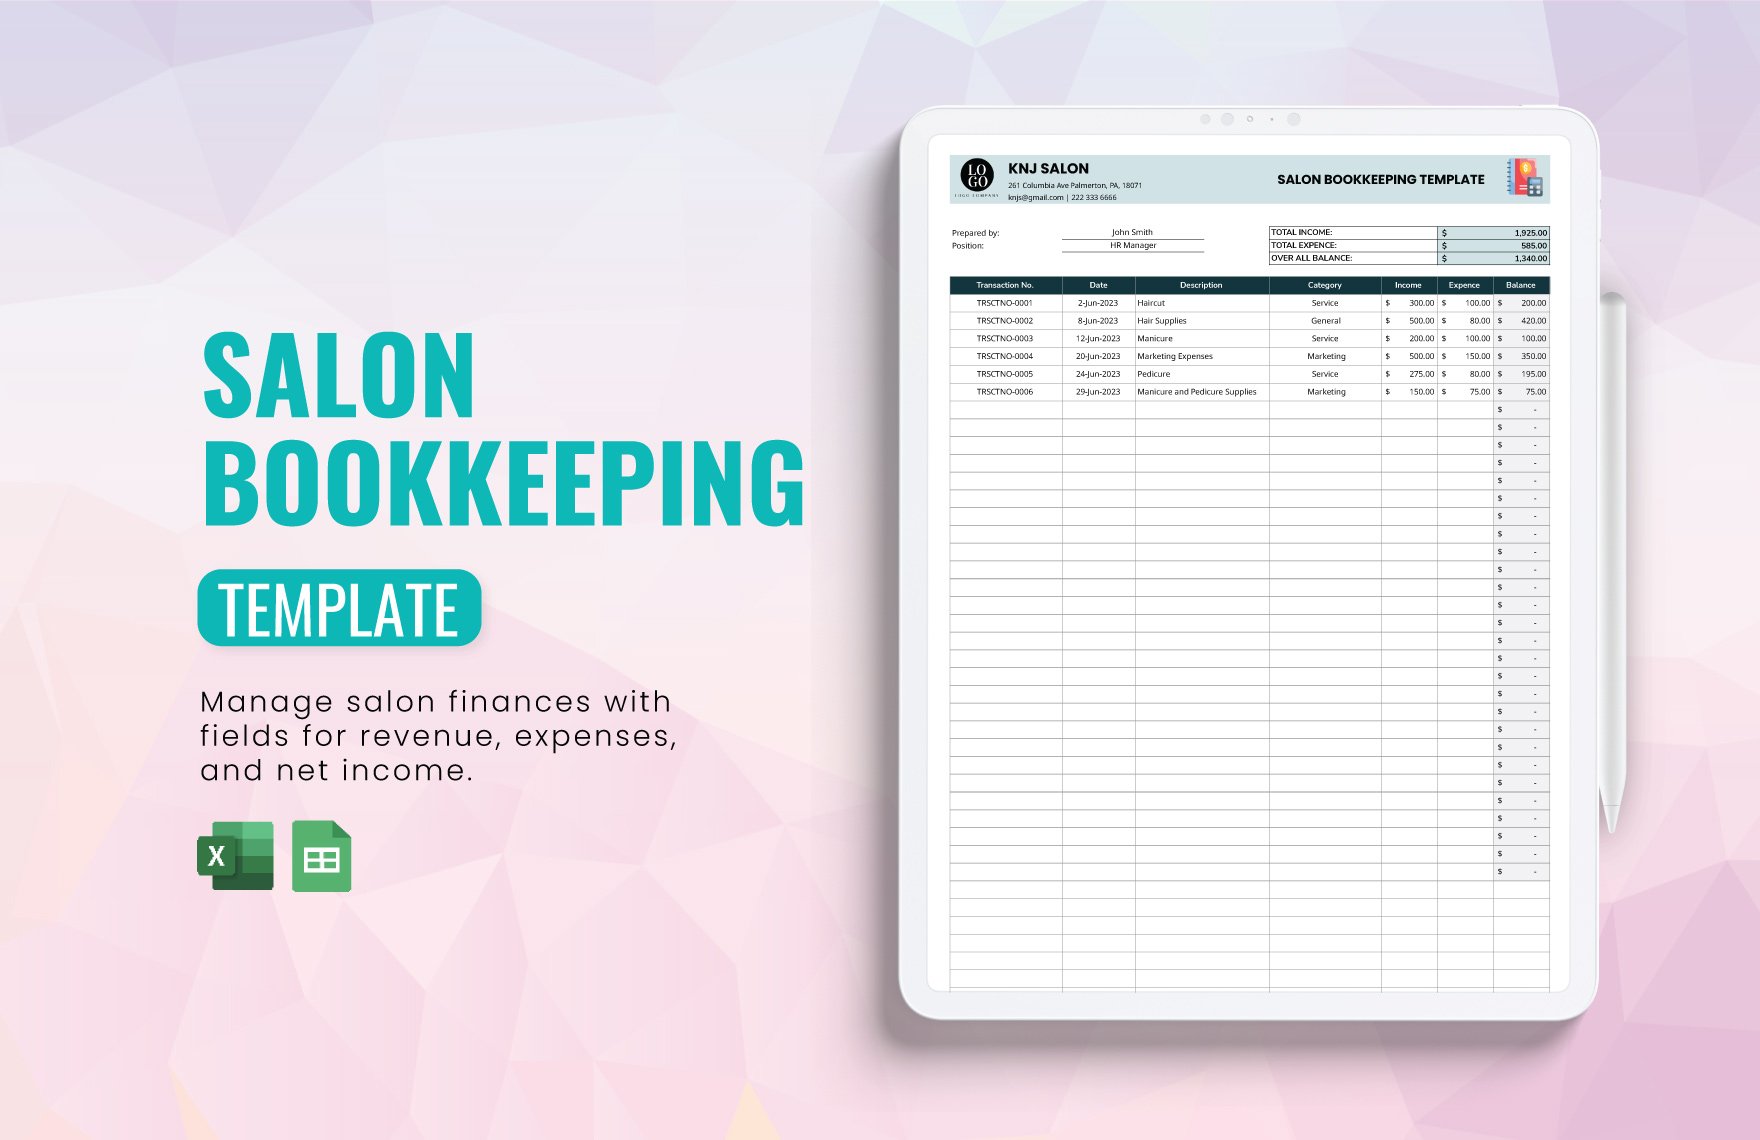 Salon Bookkeeping Template in Excel, Google Sheets